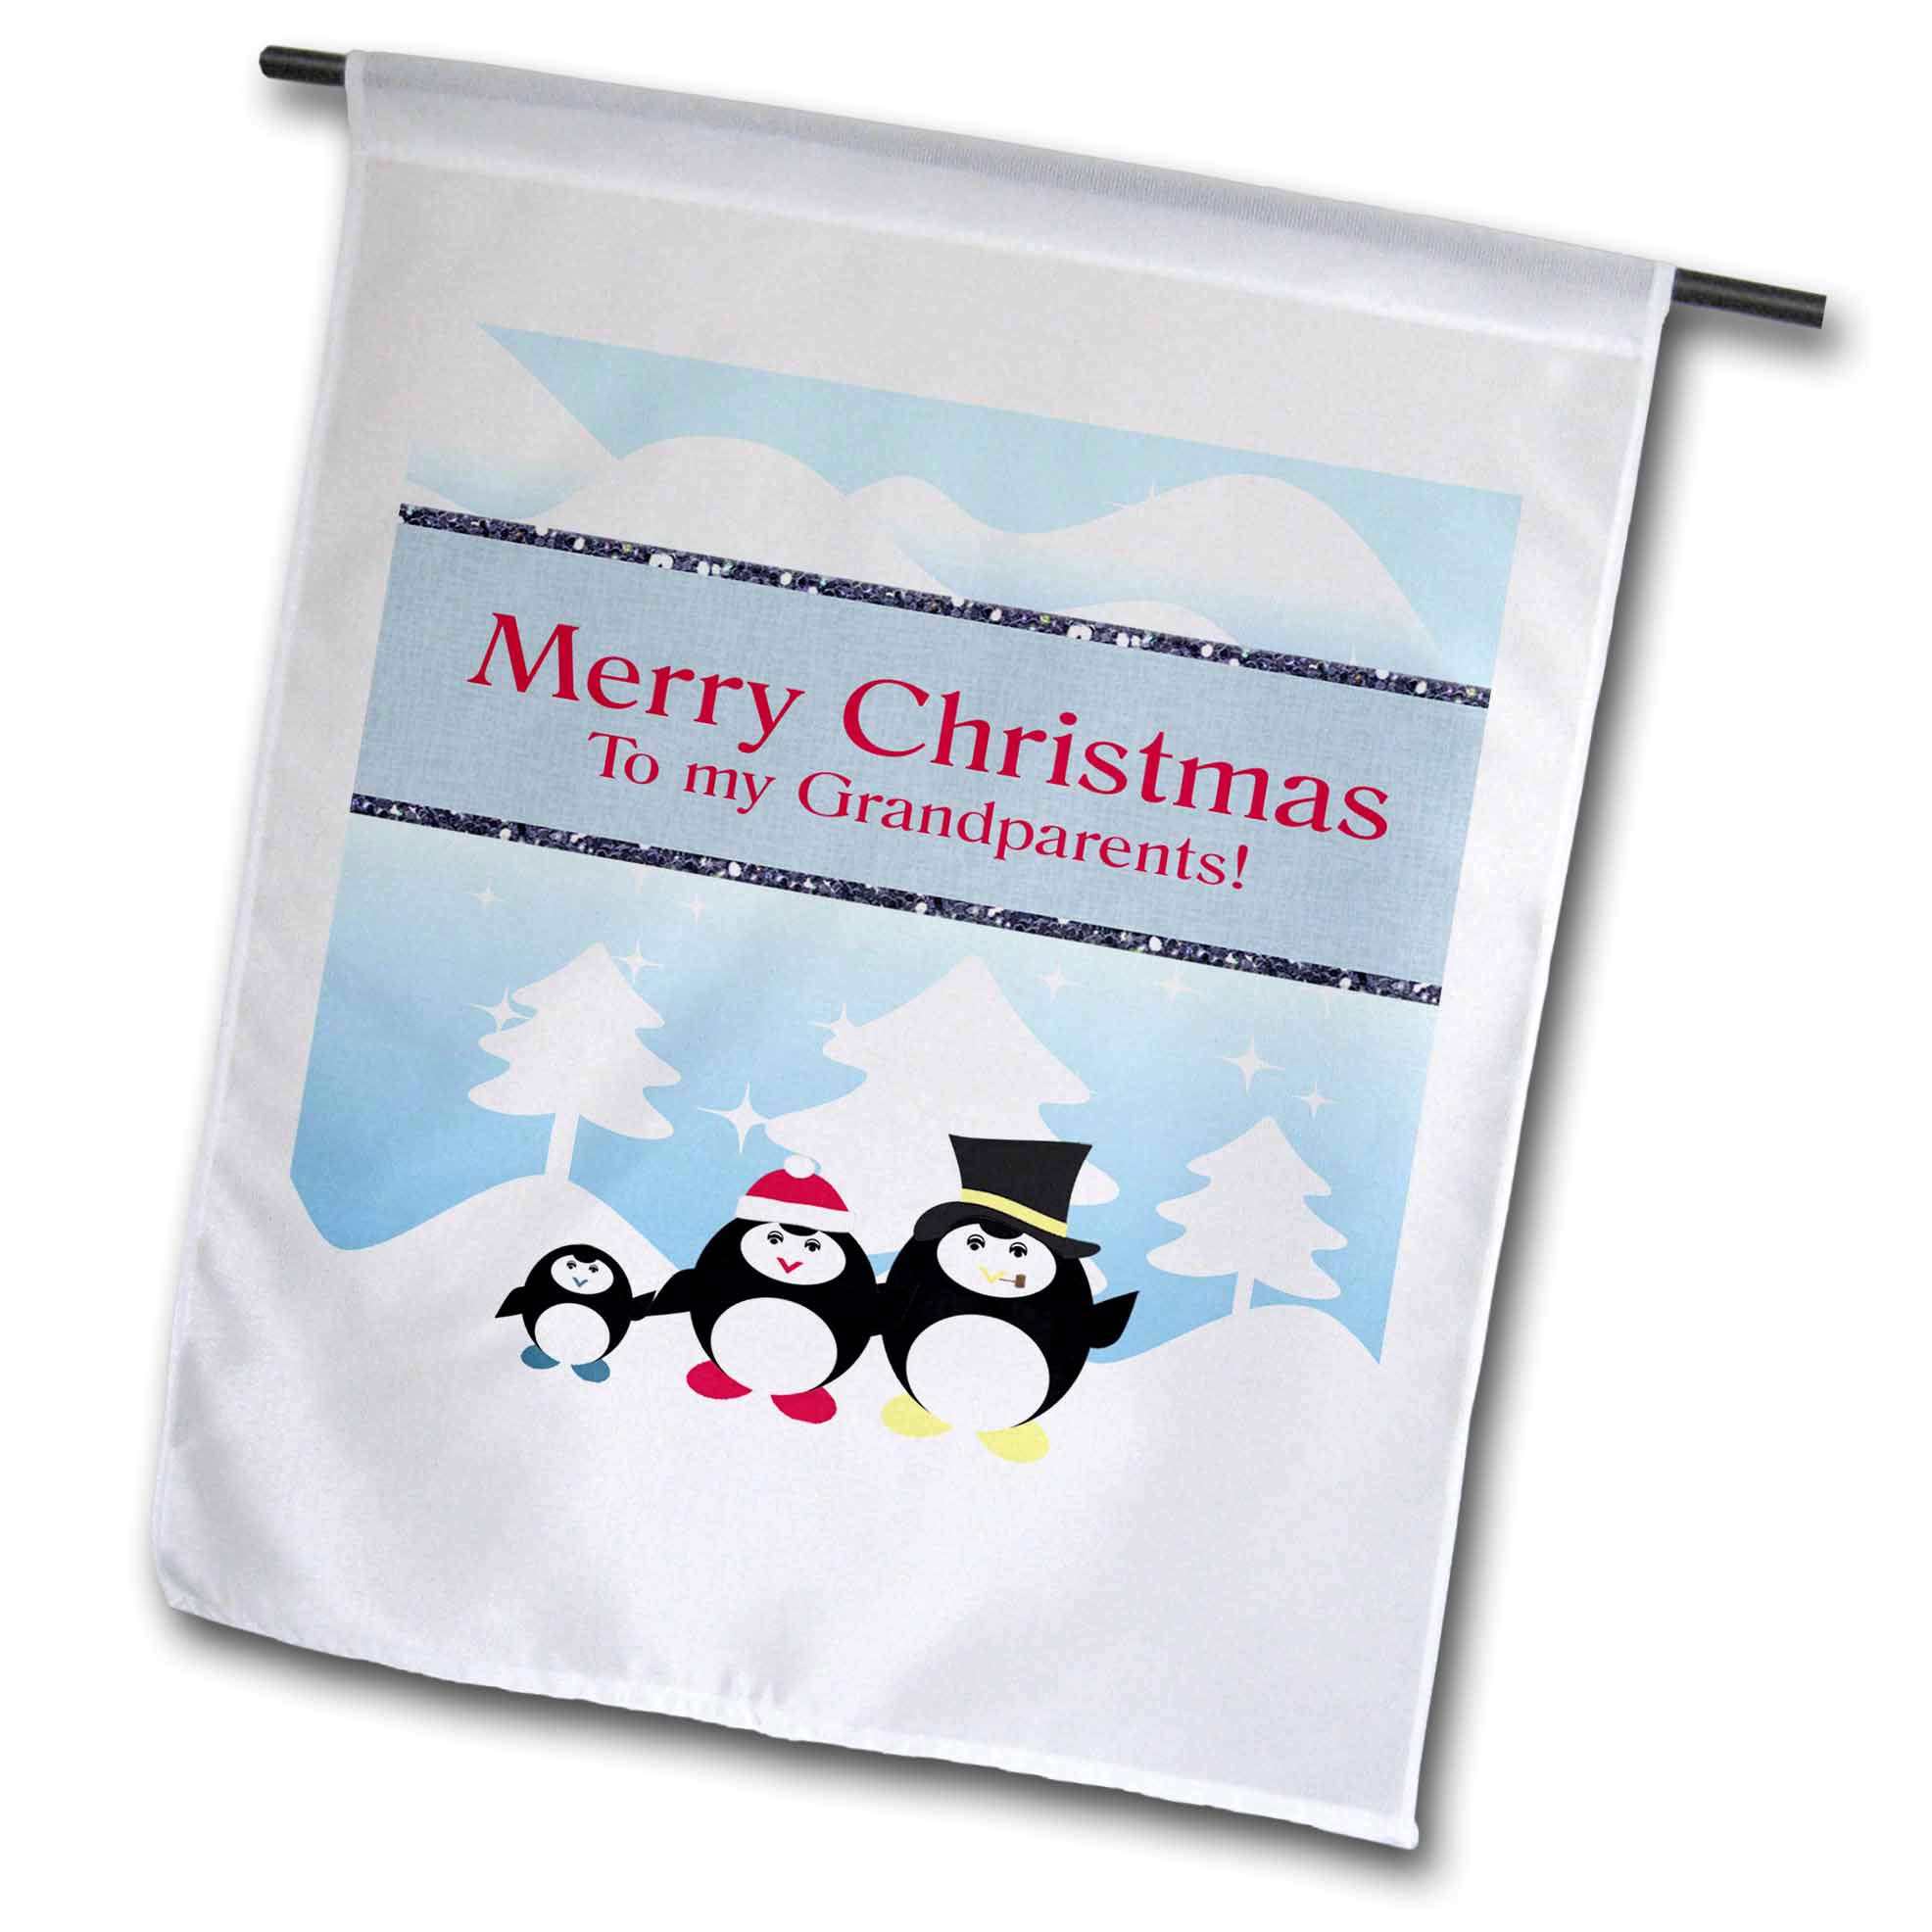 3dRose Penguin Family on a Winters Day, Merry Christmas, grandparents - Garden Flag, 12 by 18-inch - image 1 of 1